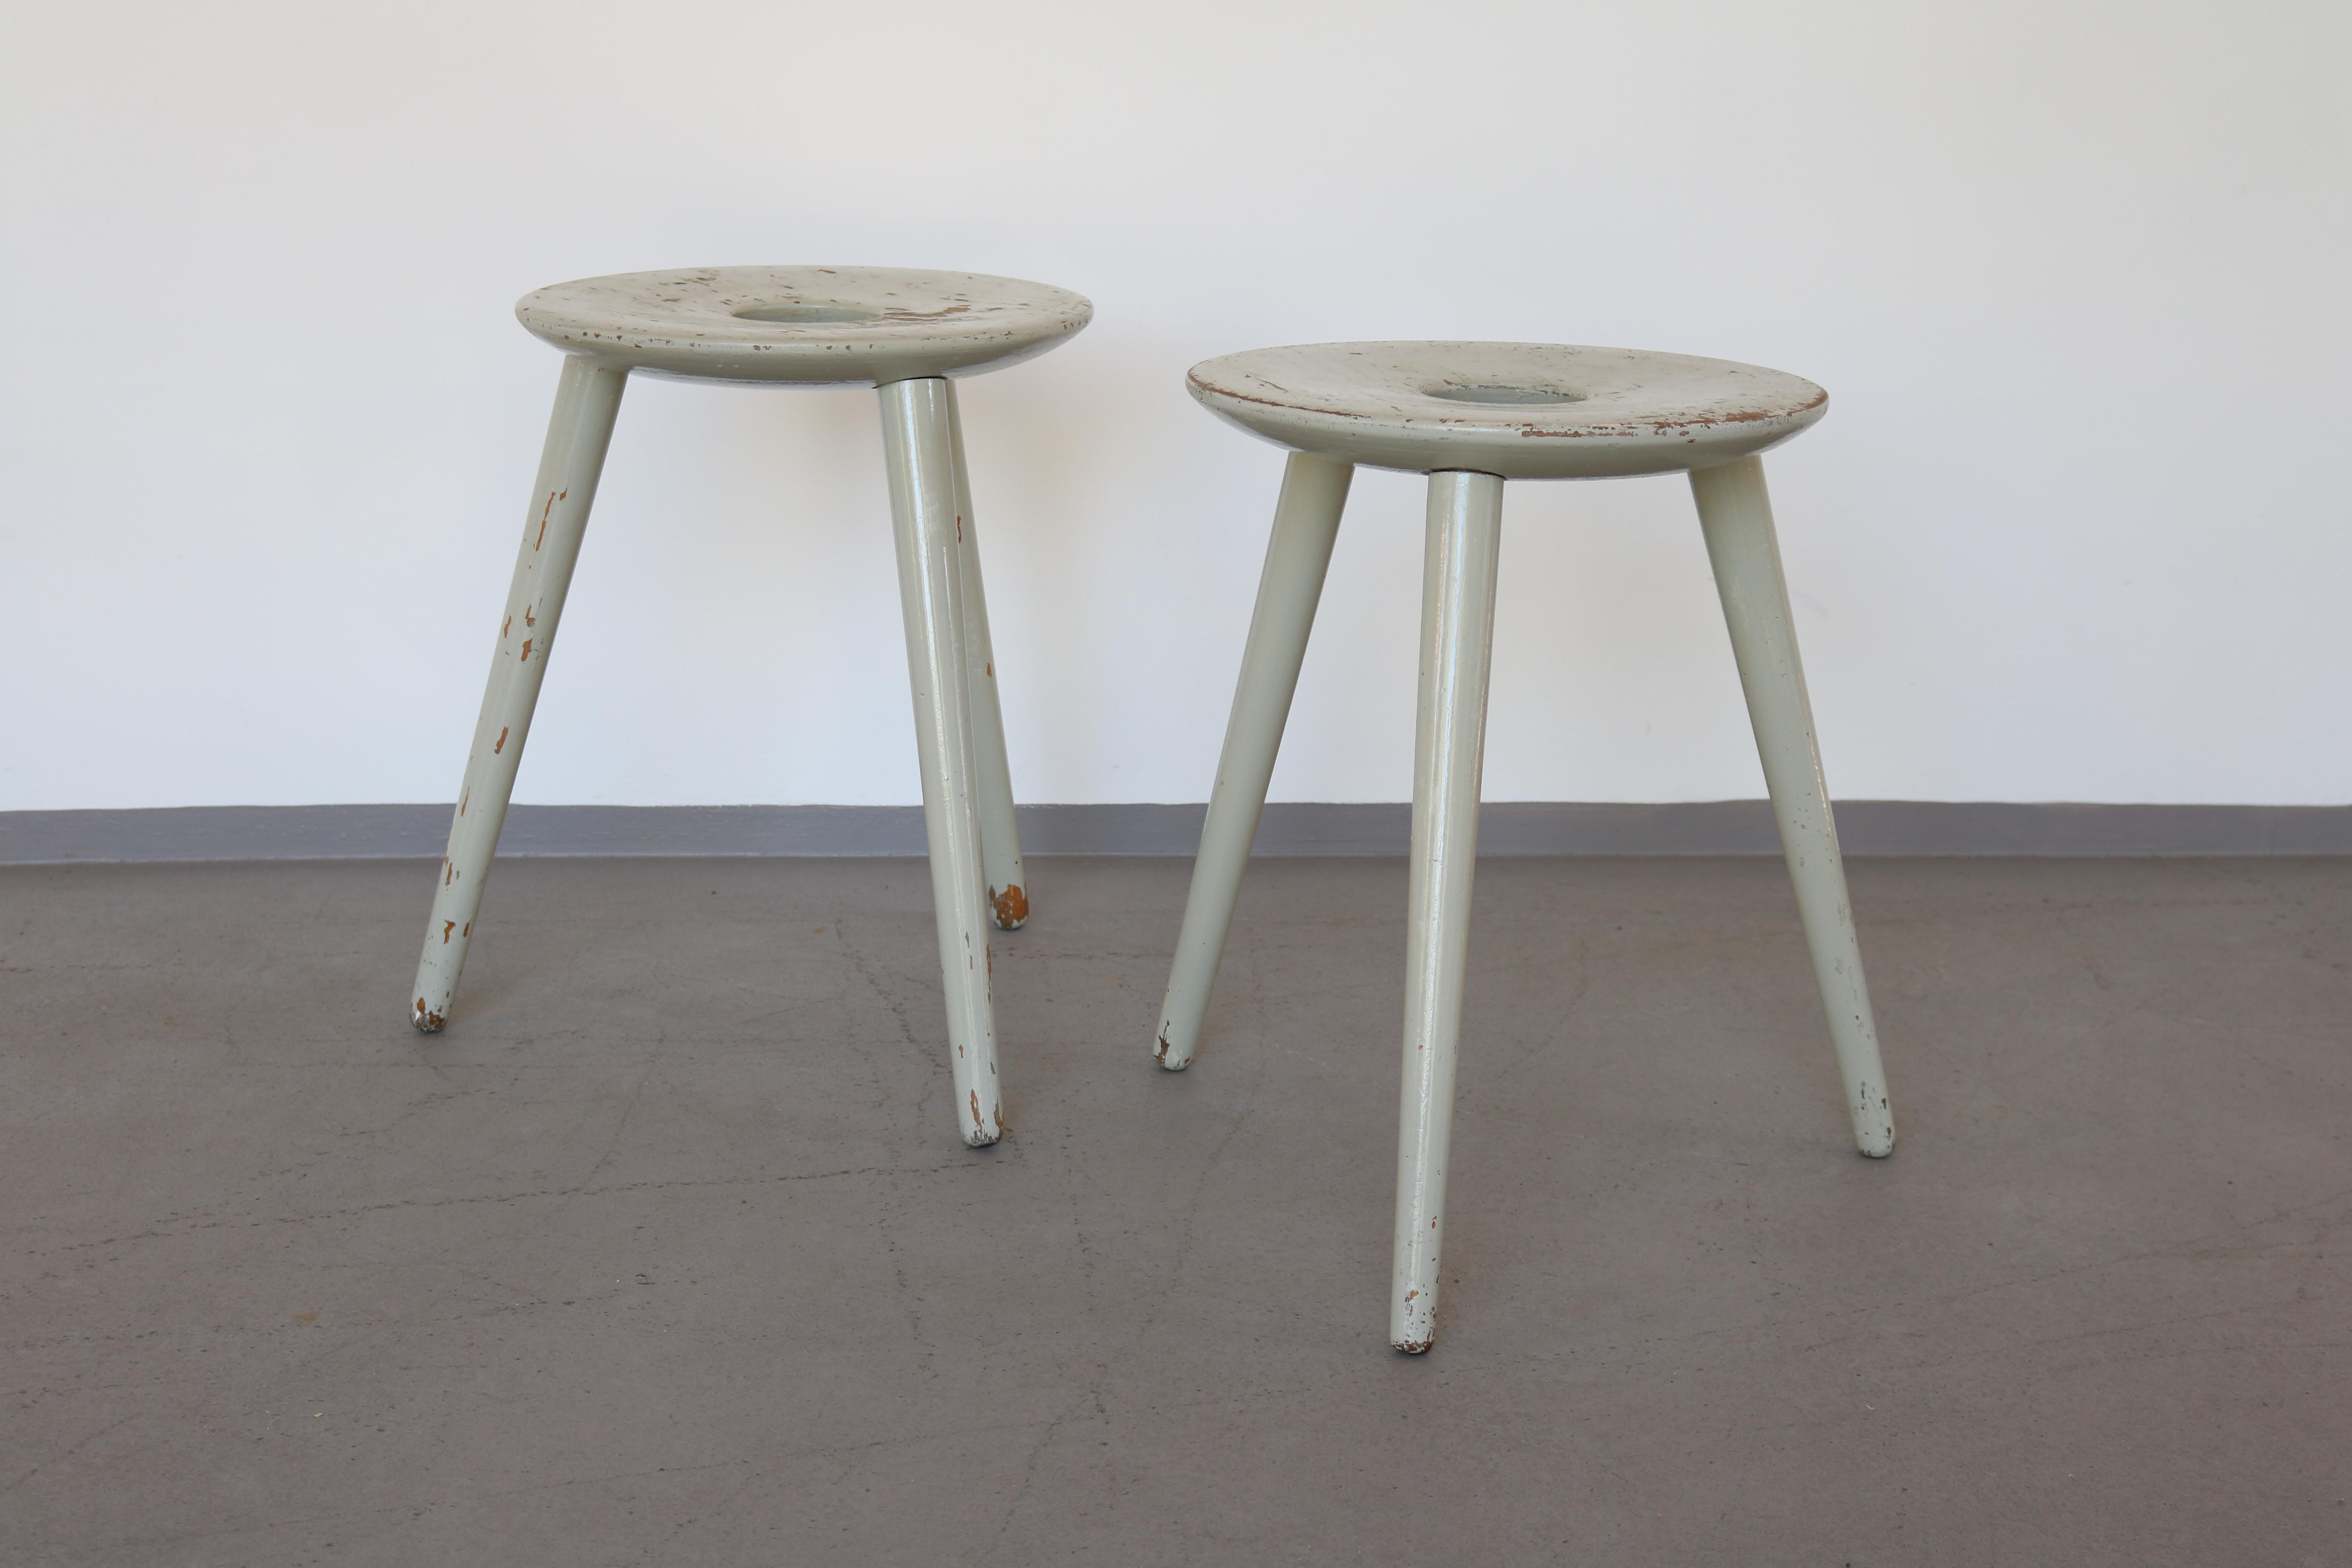 This is a very rare set of two tripod stools designed by Eduard Ludwig, the favorite student of Ludwig Mies van der Rohe at the Bauhaus, in Berlin for Georg Haydvogel 1953.
The stools are only cleaned. See the pictures.